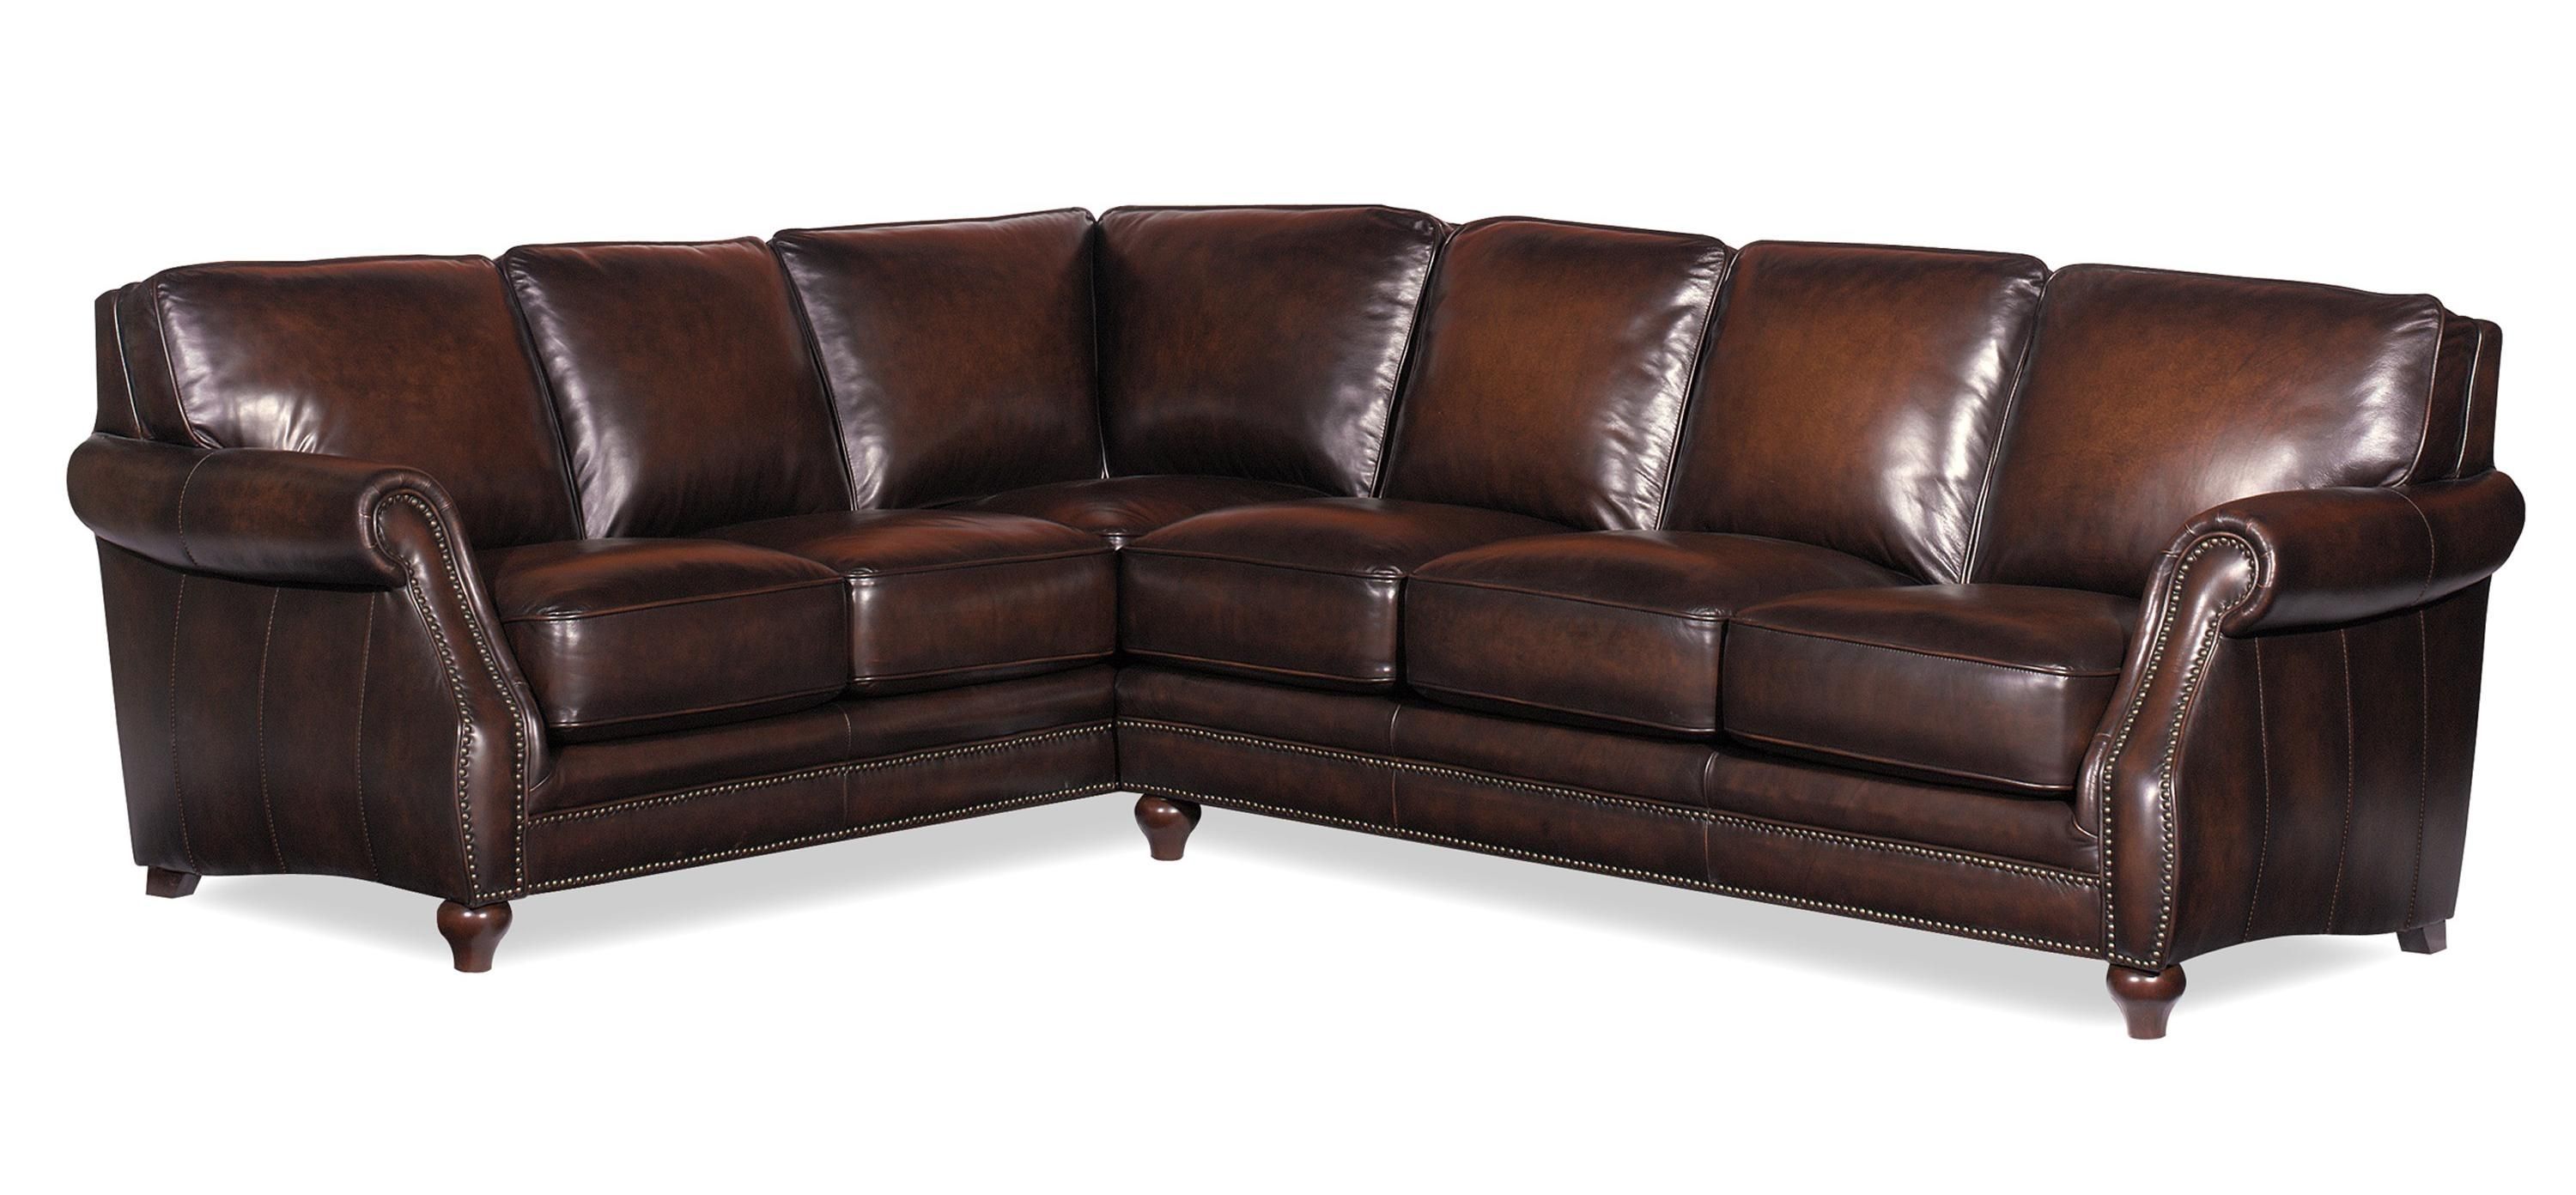 L121500 Two Piece Sectional Sofahickorycraft//johnny Janosik For Johnny Janosik Sectional Sofas (Photo 5 of 10)